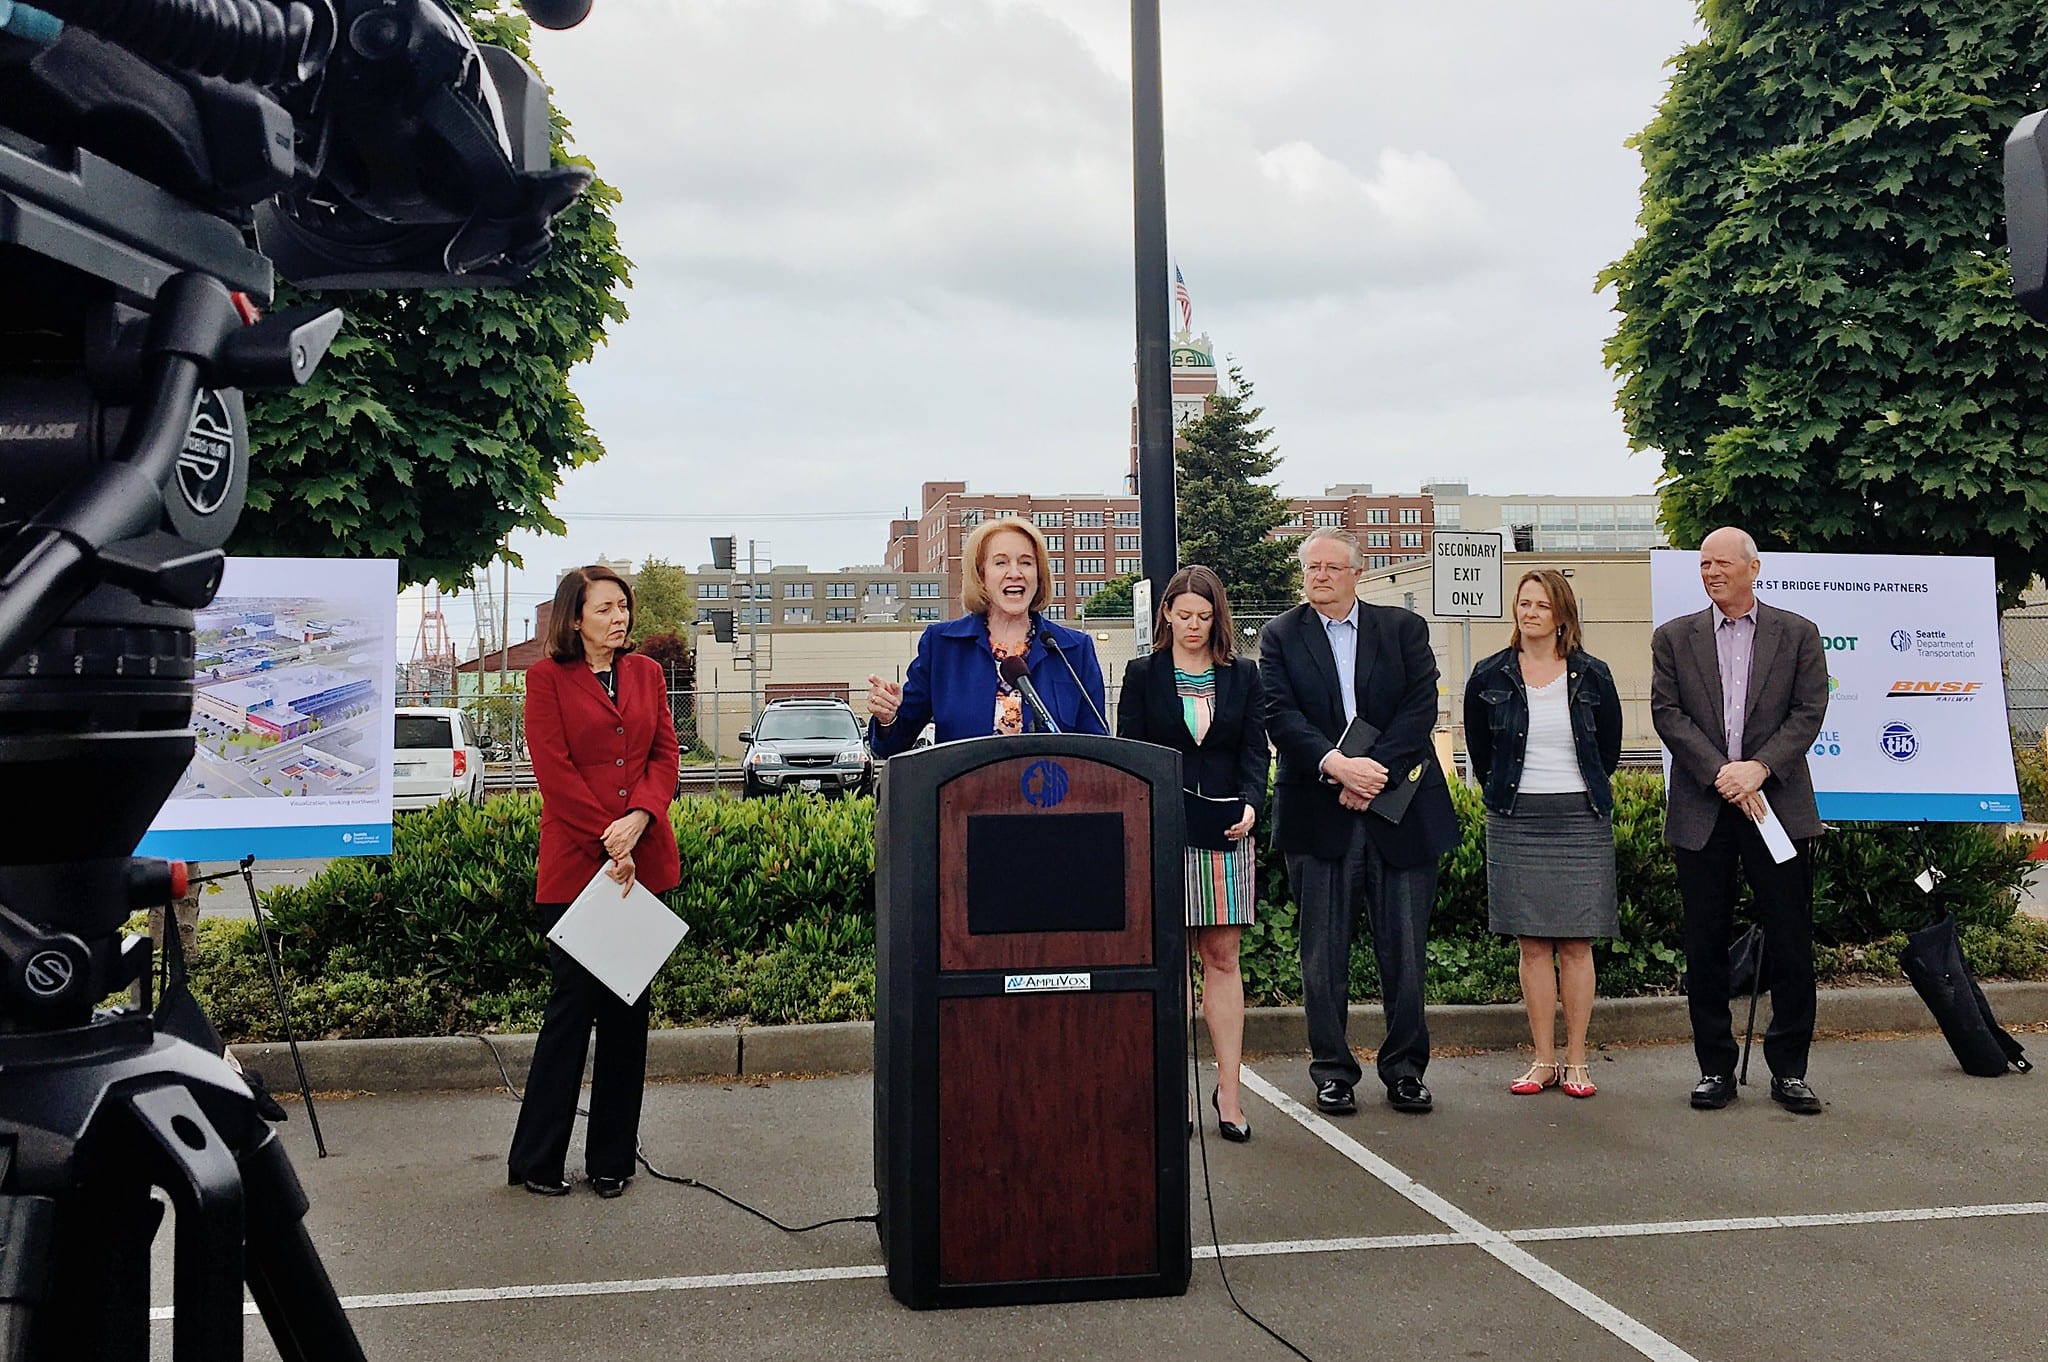 In May 2018, Mayor Jenny Durkan announced the breaking of ground on the Lander St Bridge Project. Photo Credit: Jeanne Clark